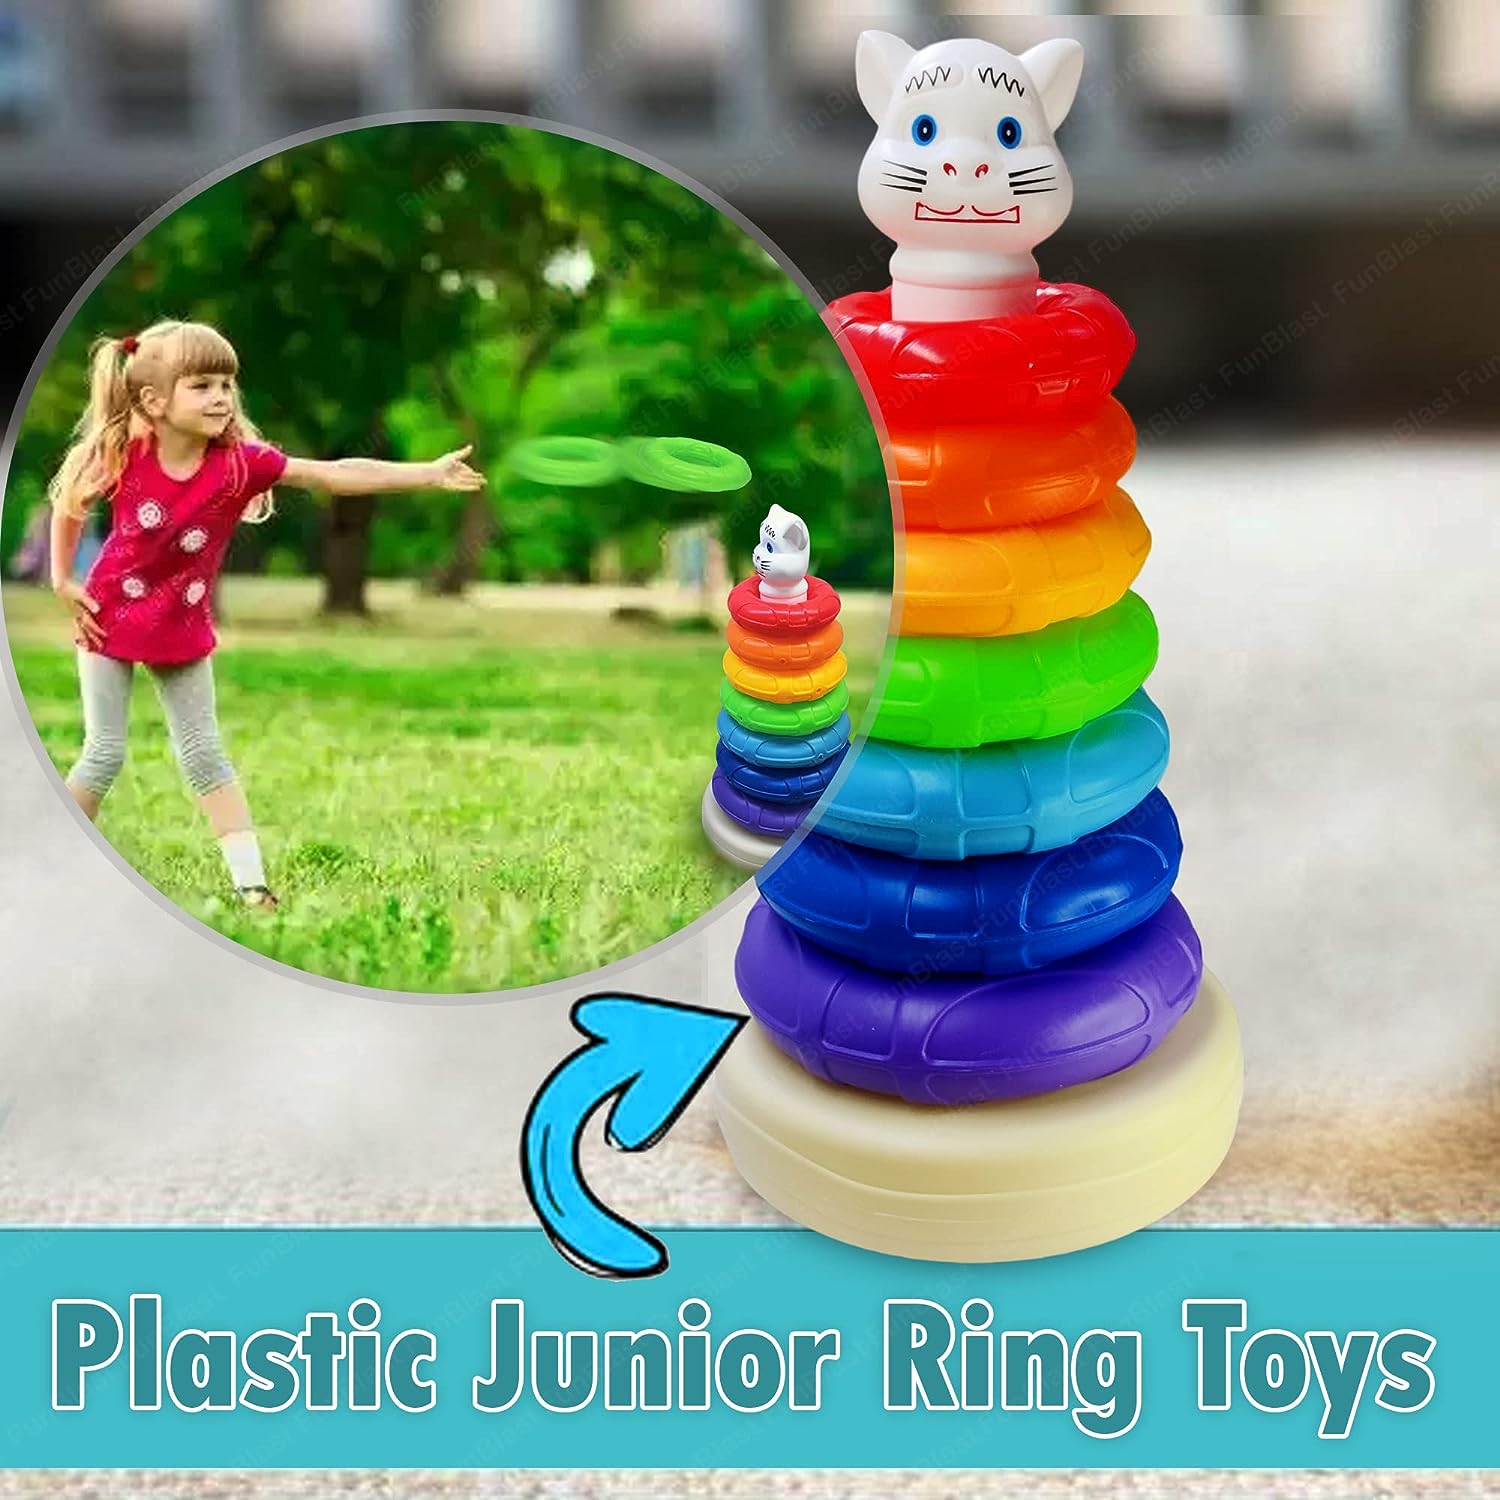 Little's Junior Stacking Ring Toys for Kids, - Junior Stacking Ring Toys  for Kids, . Buy Junior Rings toys in India. shop for Little's products in  India. Toys for 6 - 24 Months Kids. | Flipkart.com